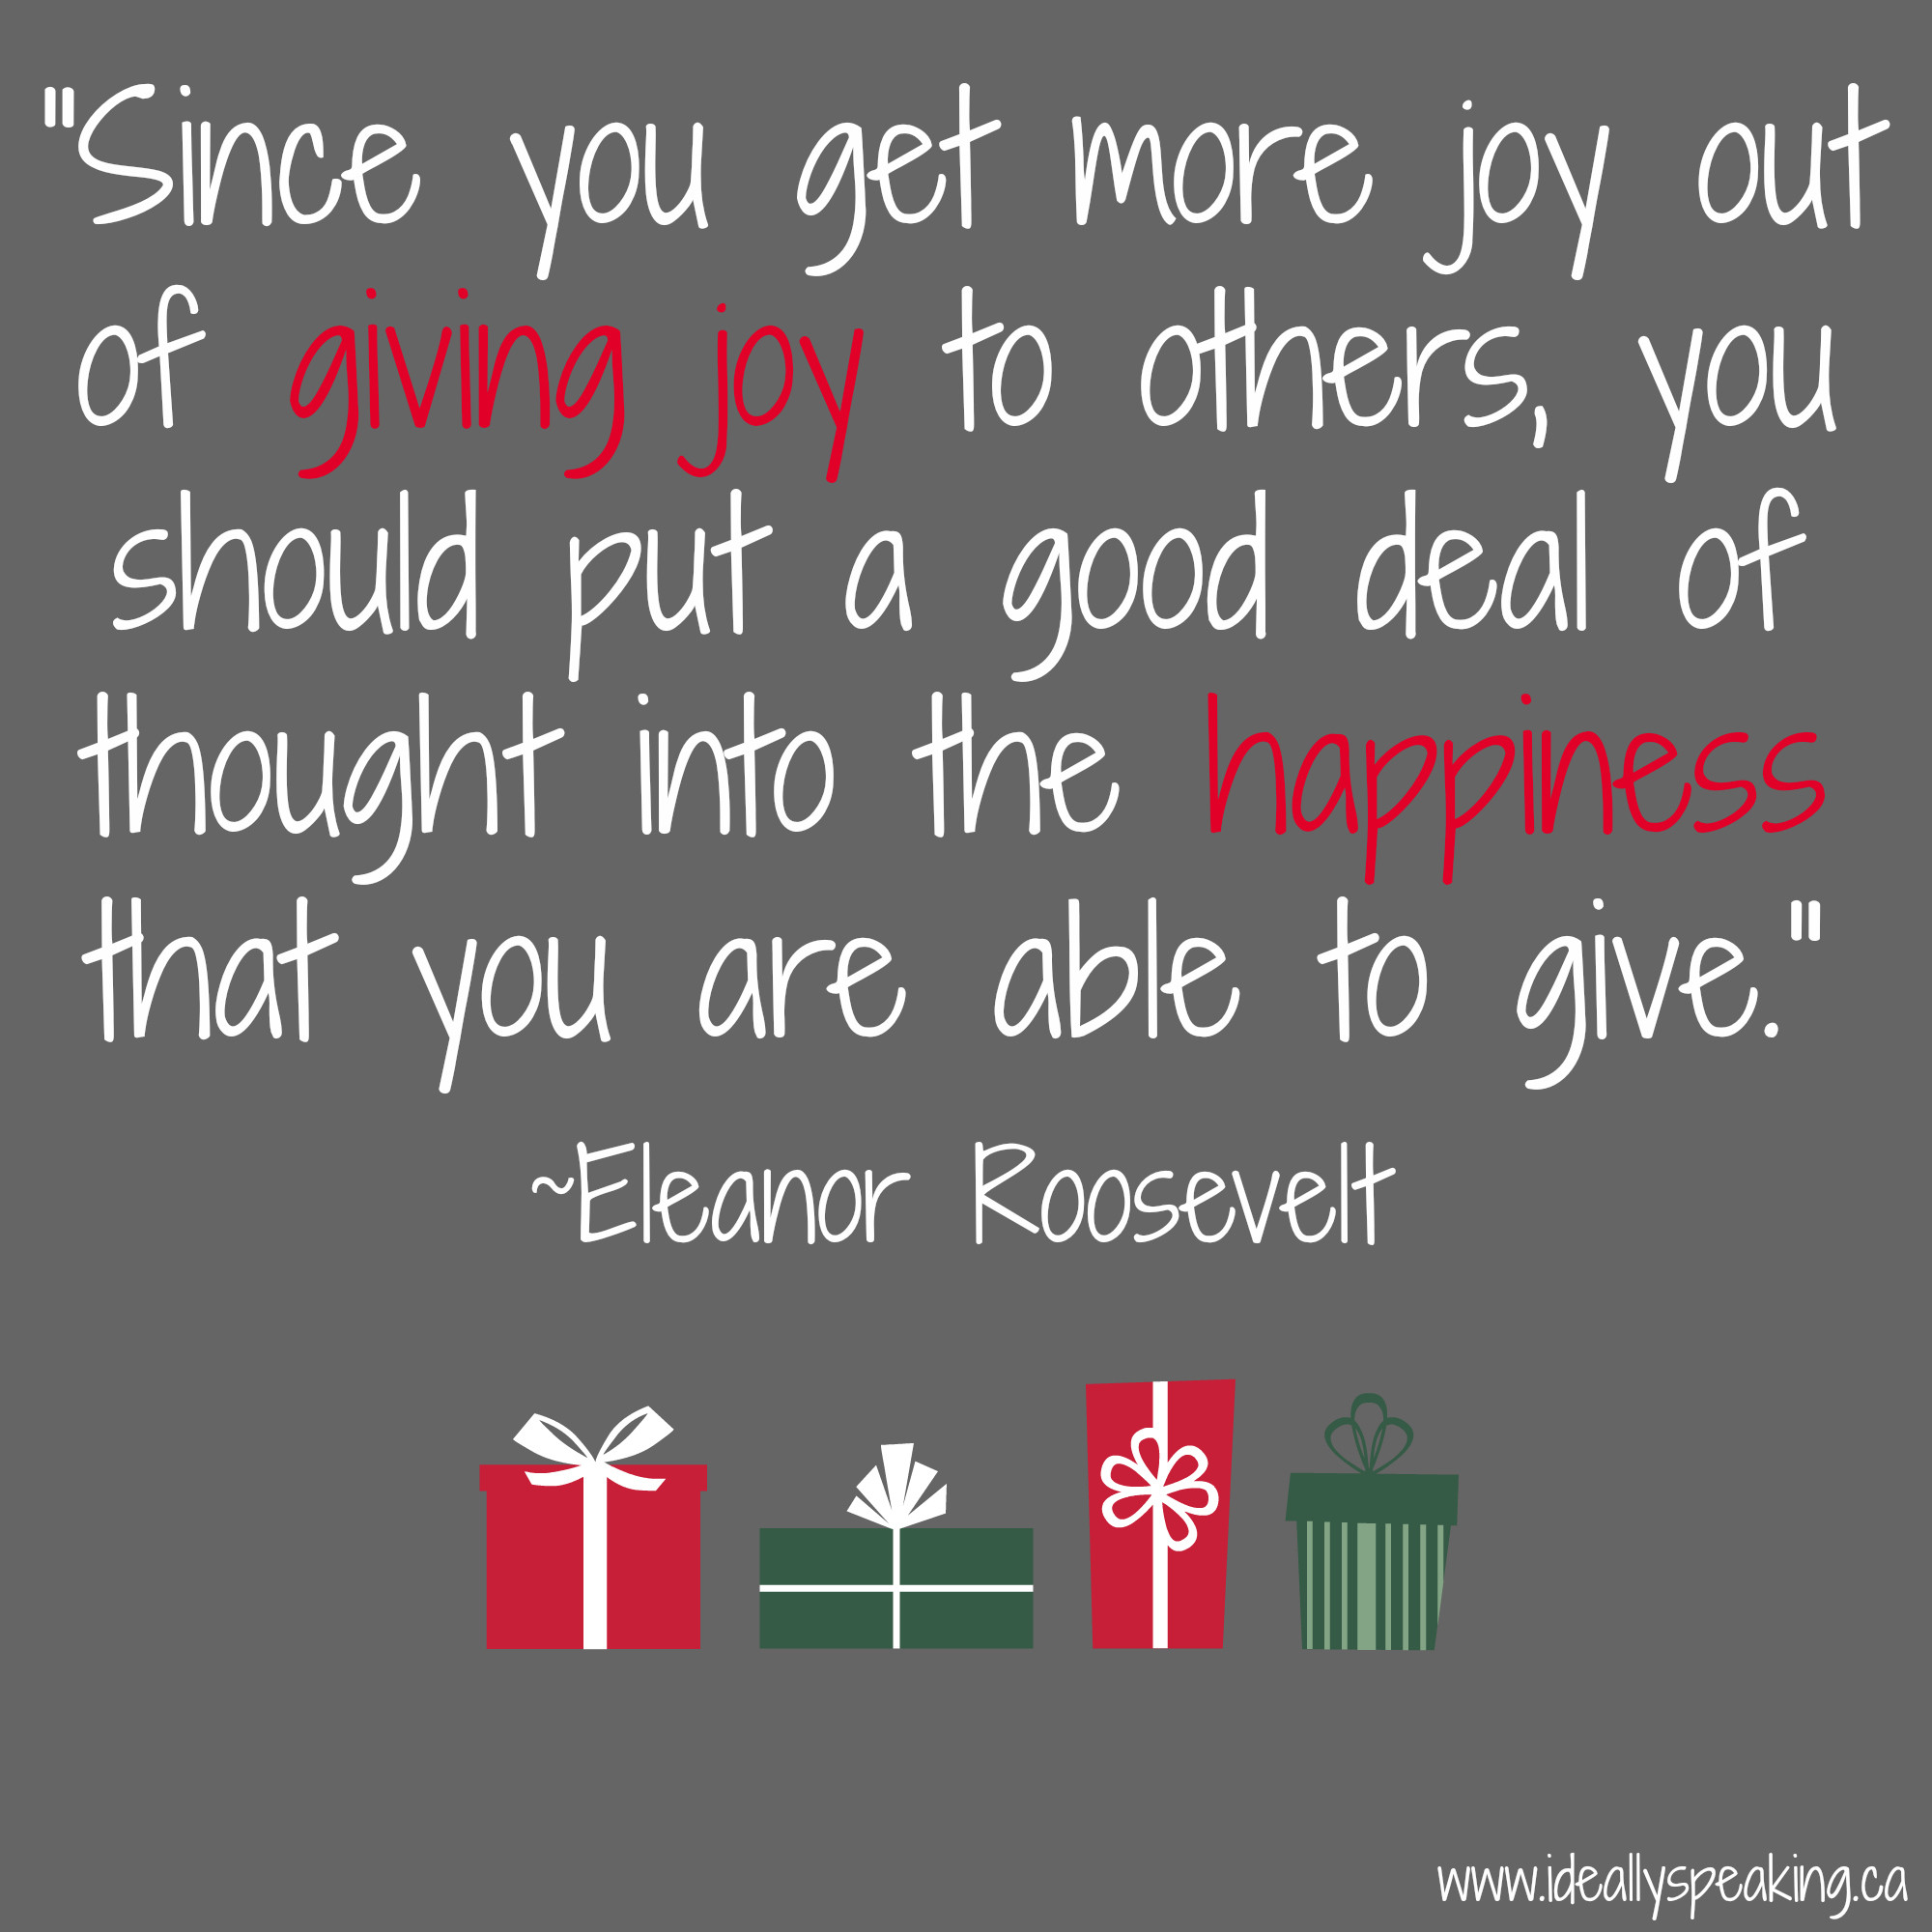 Christmas Giving Quotes
 The magic of giving & hottest holiday t contest